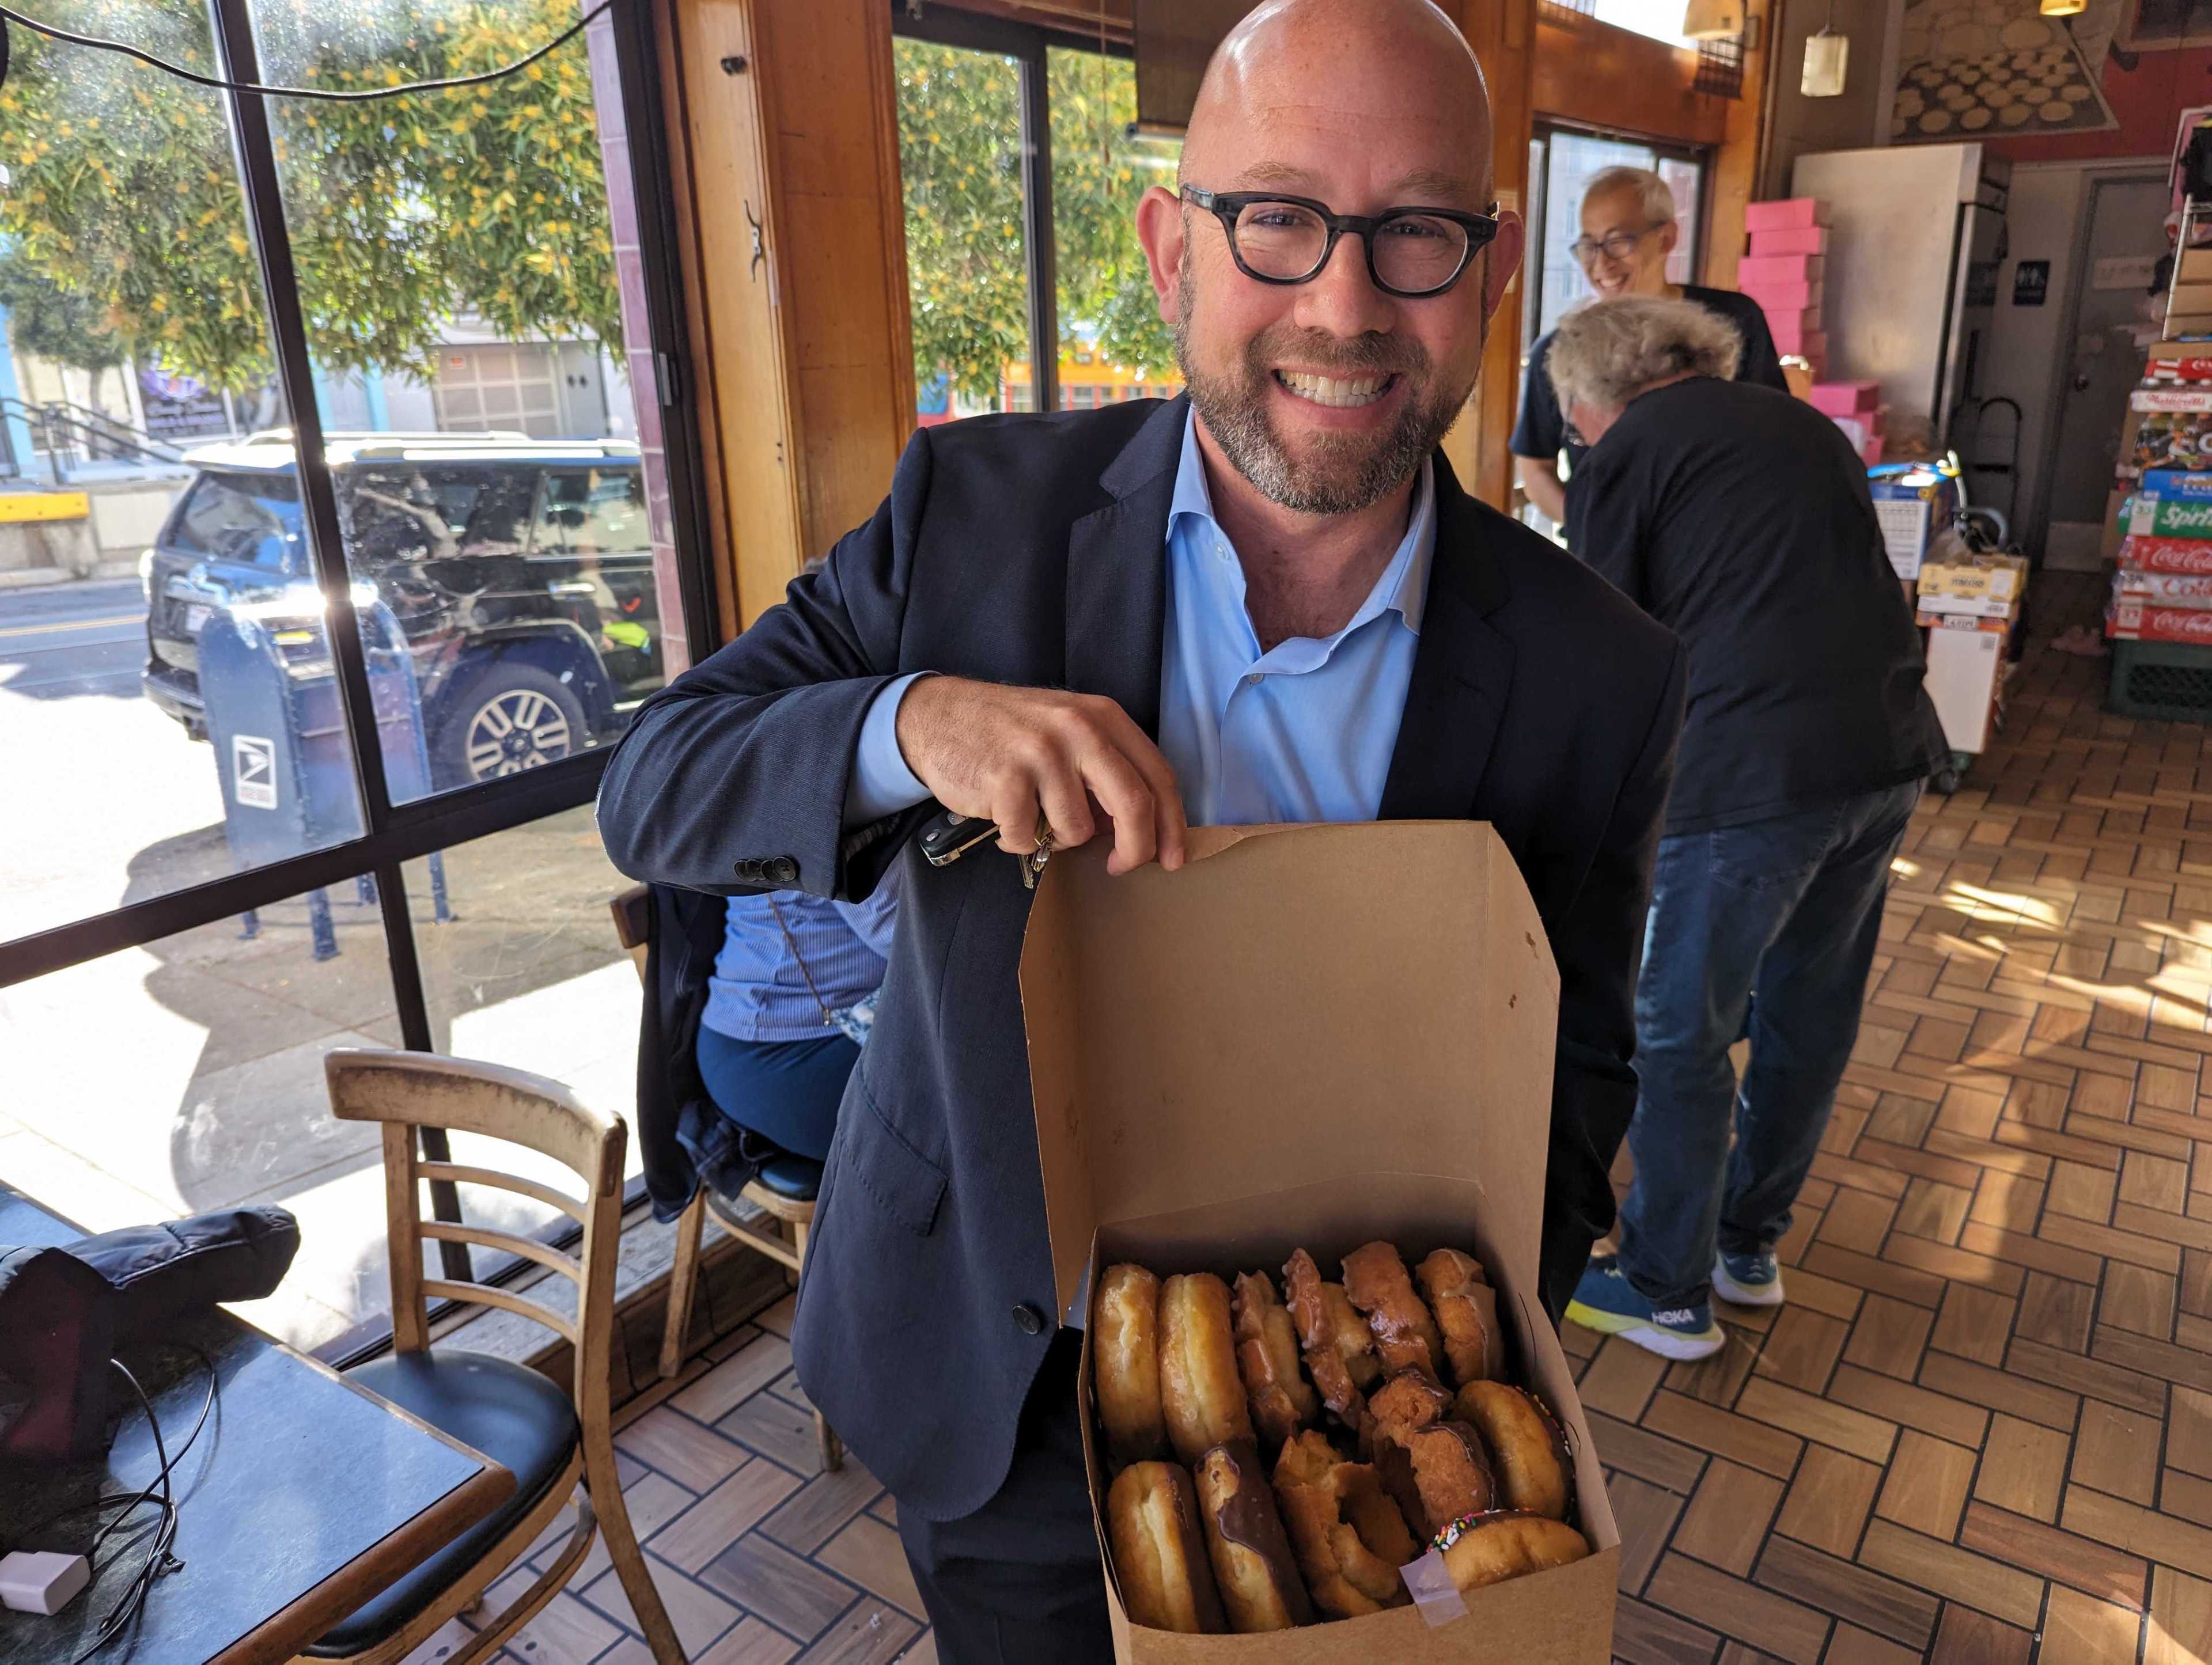 San Francisco Supervisor Rafael Mandelman holds a tray of freshly baked doughnuts Wednesday inside the Happy Donuts shop in Noe Valley.